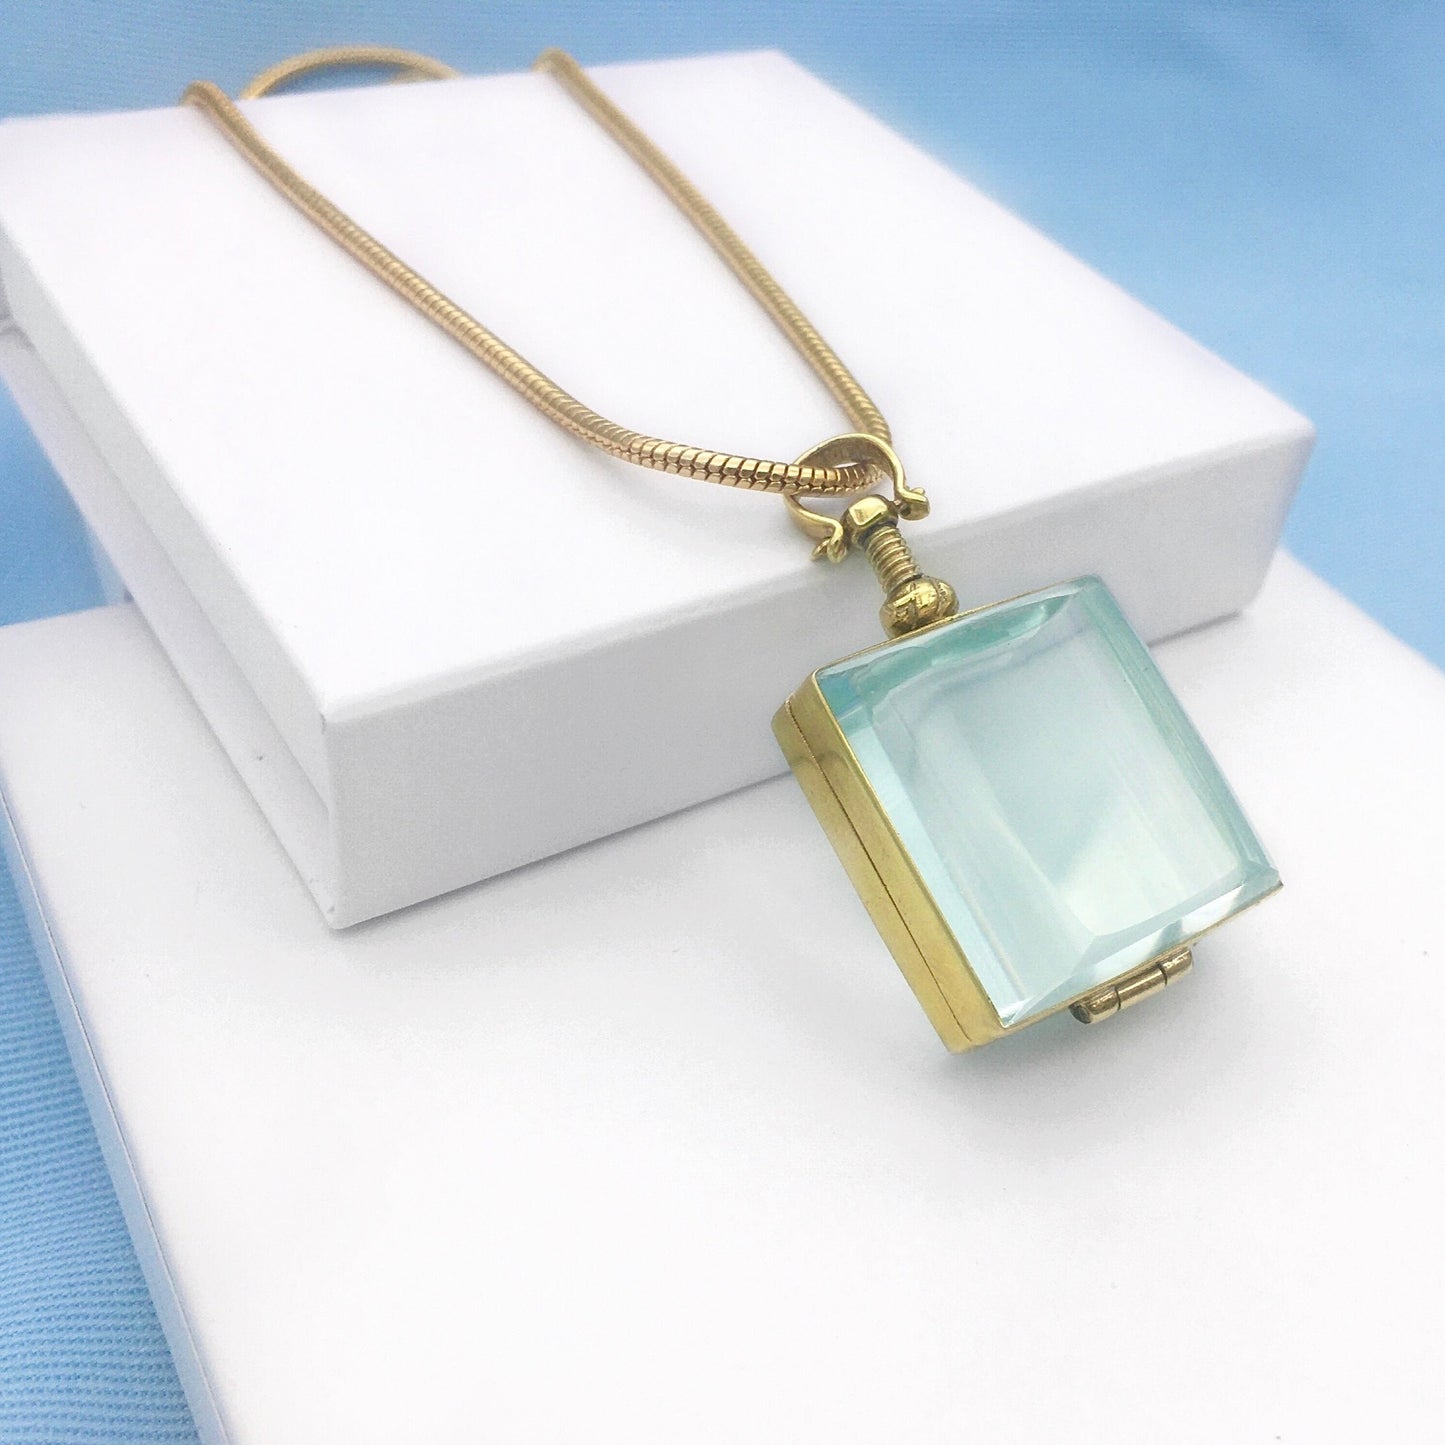 Square Shaped Gold Plated Glass Locket